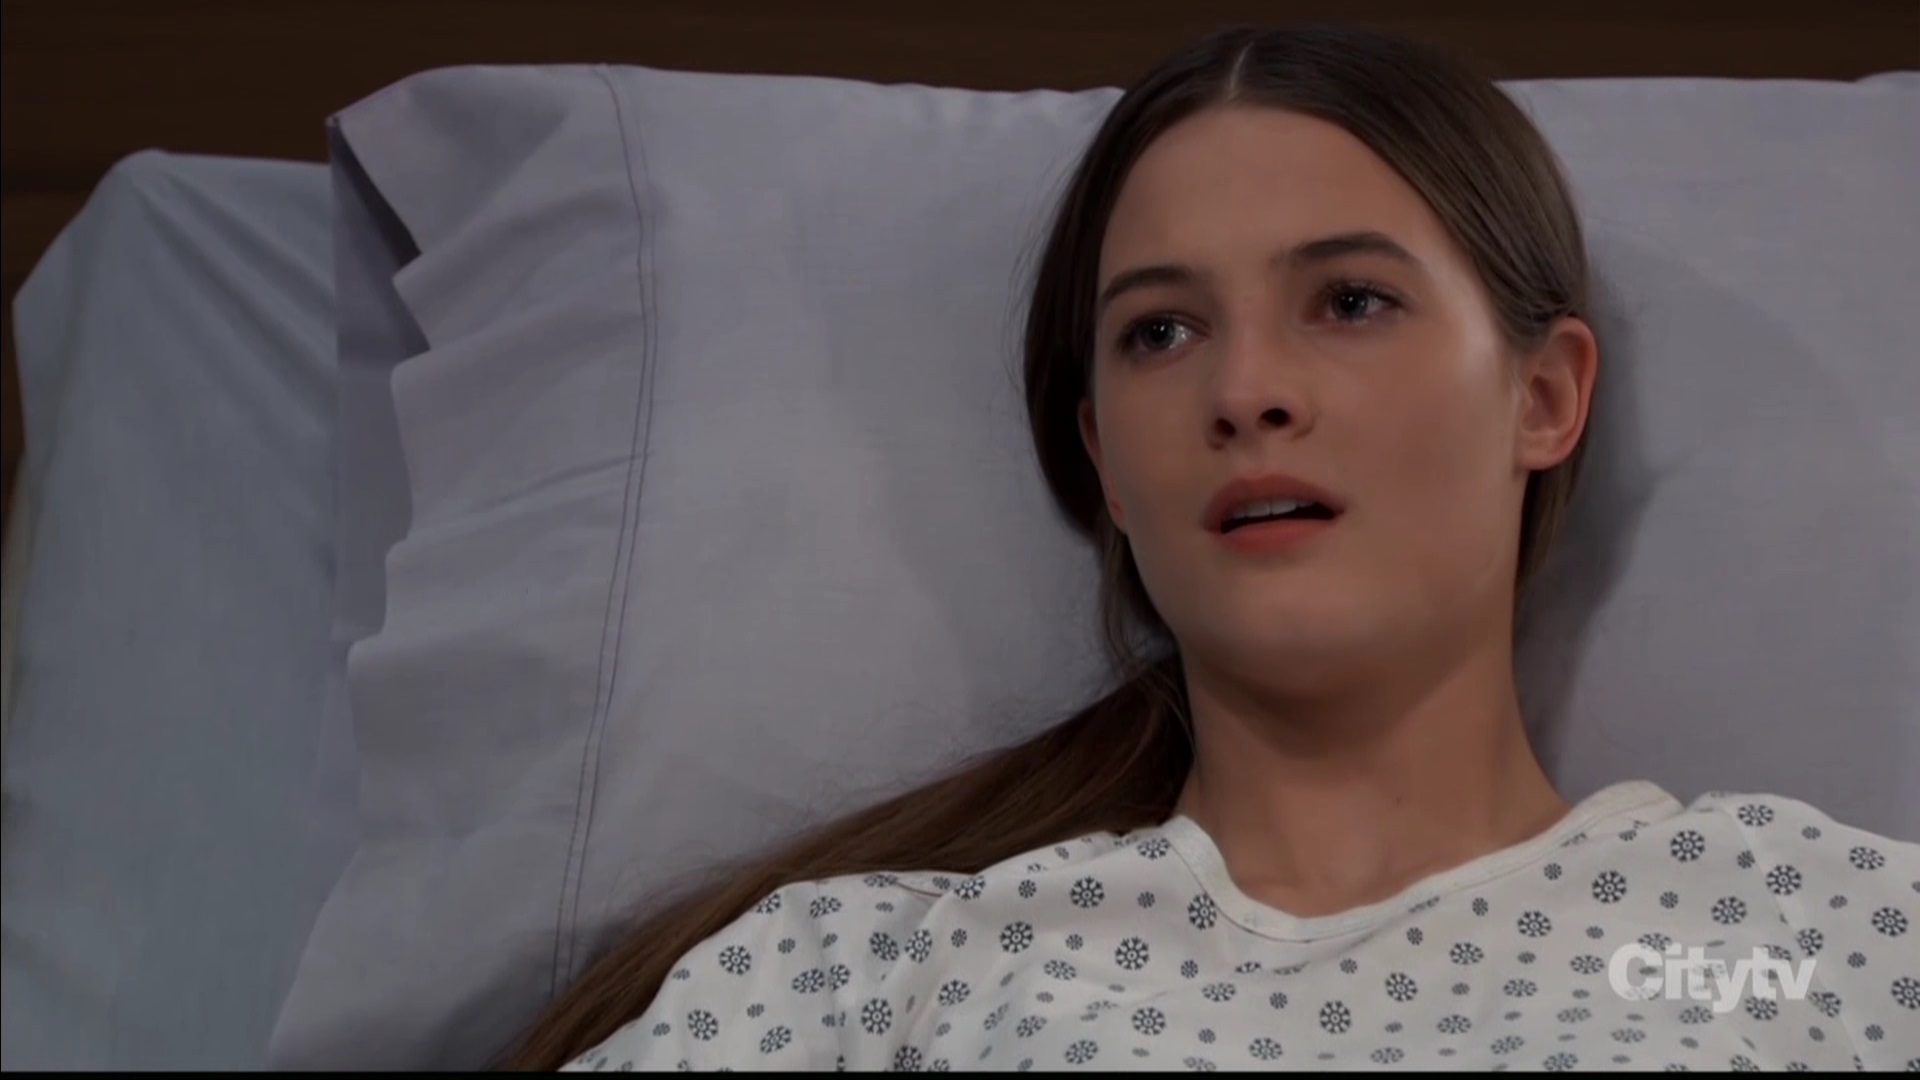 esme learns ace coming to spring ridge GH recaps